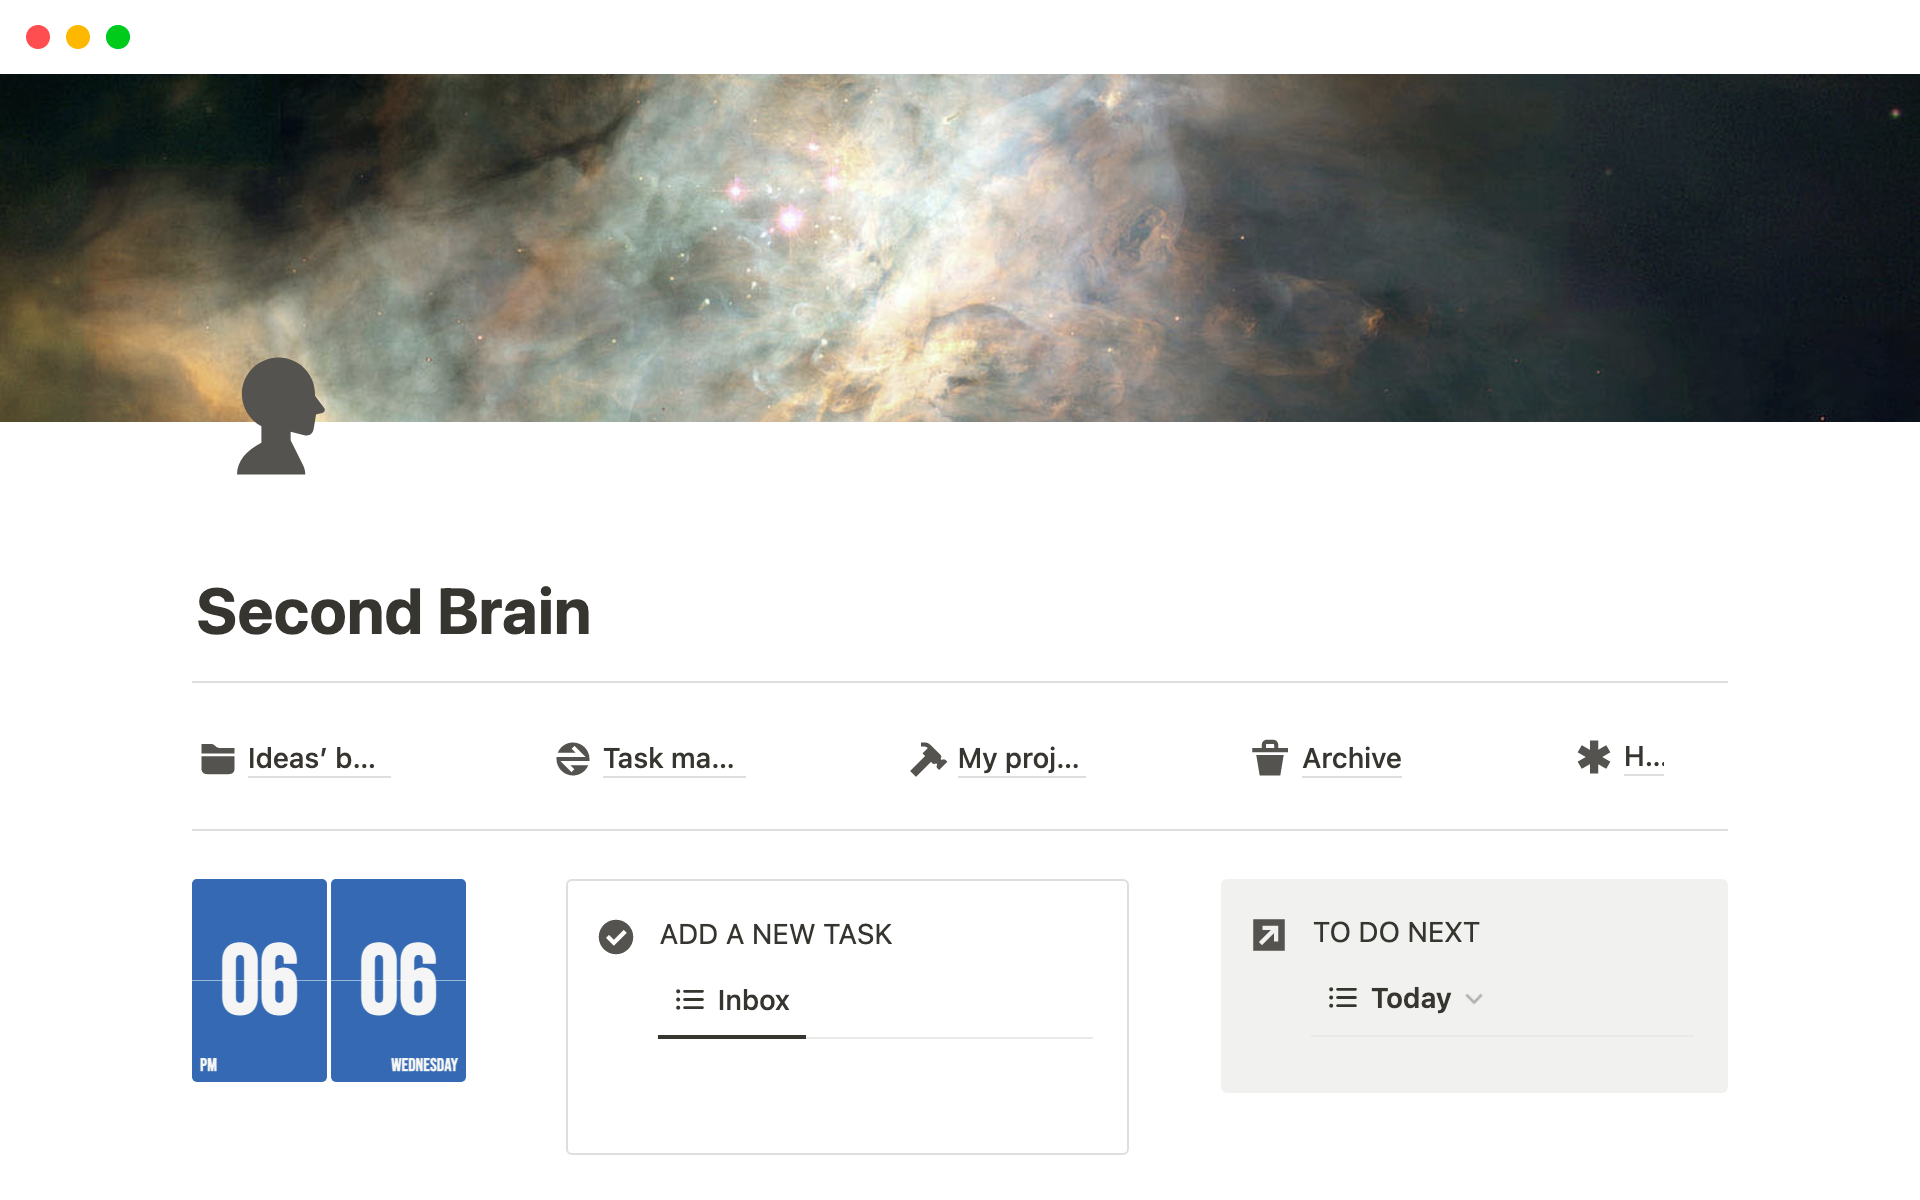 This Second brain system lets you have all your thought and relevant info in one place.